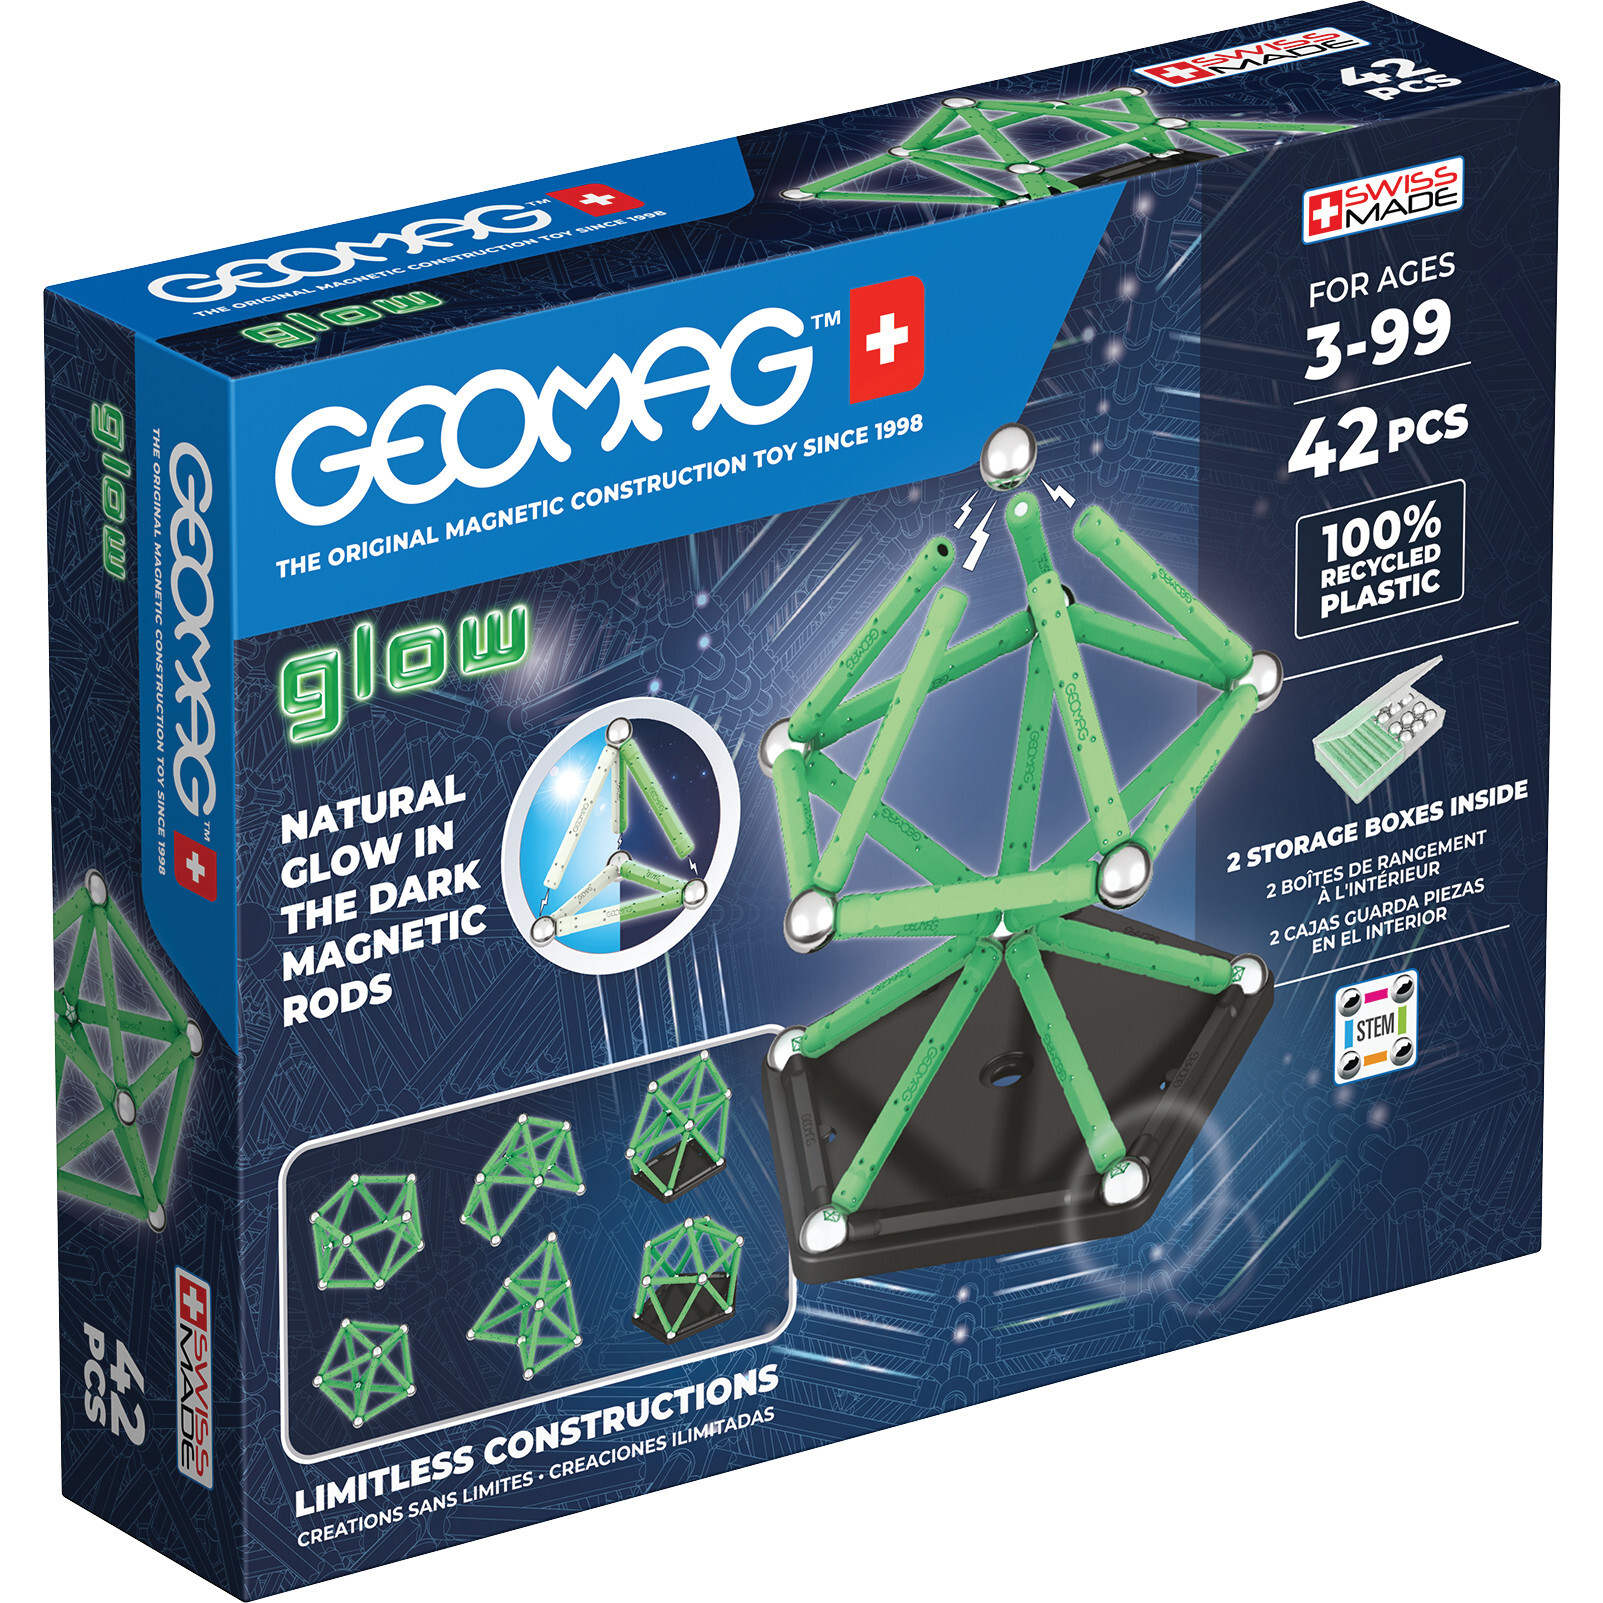 Geomagworld - The original magnetic construction toy since 1998